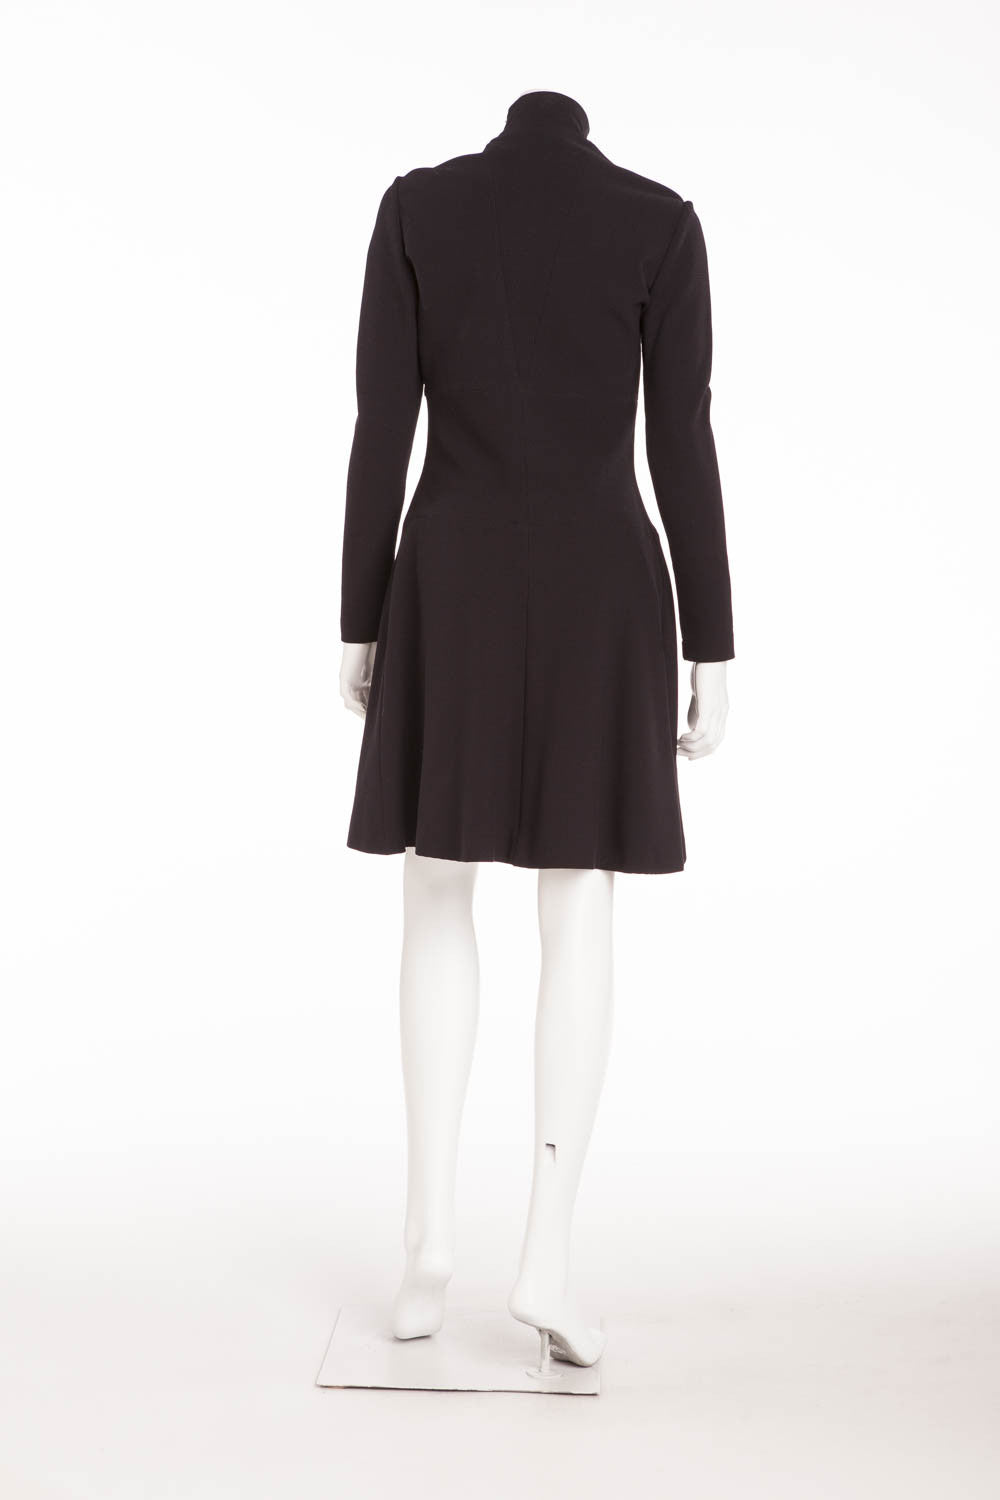 Chanel - Long Sleeve High Neck Dress - FR 38 – LUXHAVE